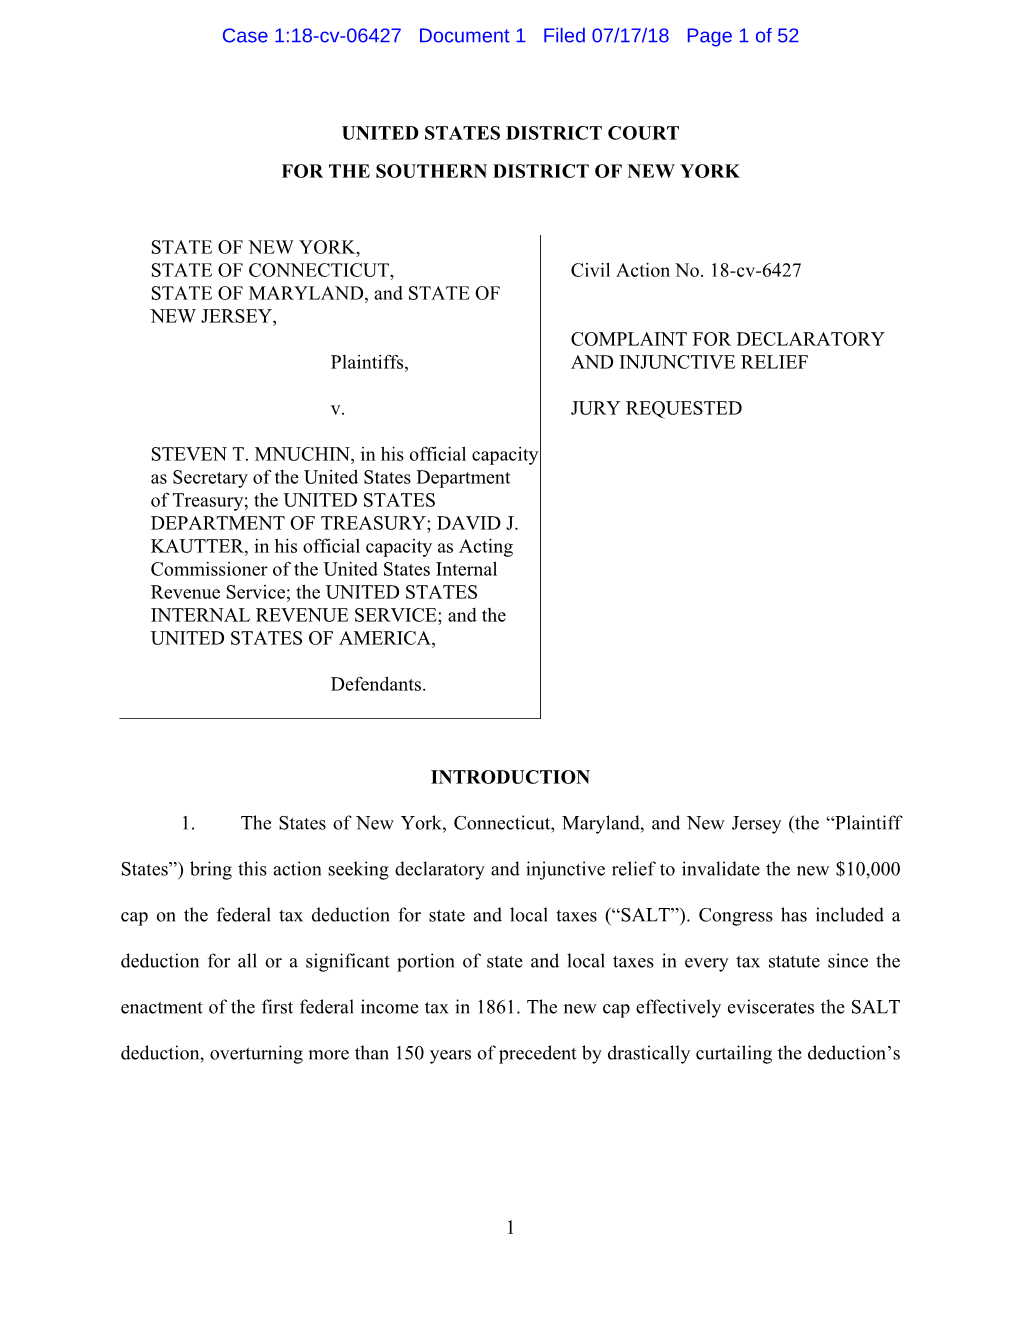 1 United States District Court for the Southern District of New York State of New York, State of Connecticut, State of Maryla